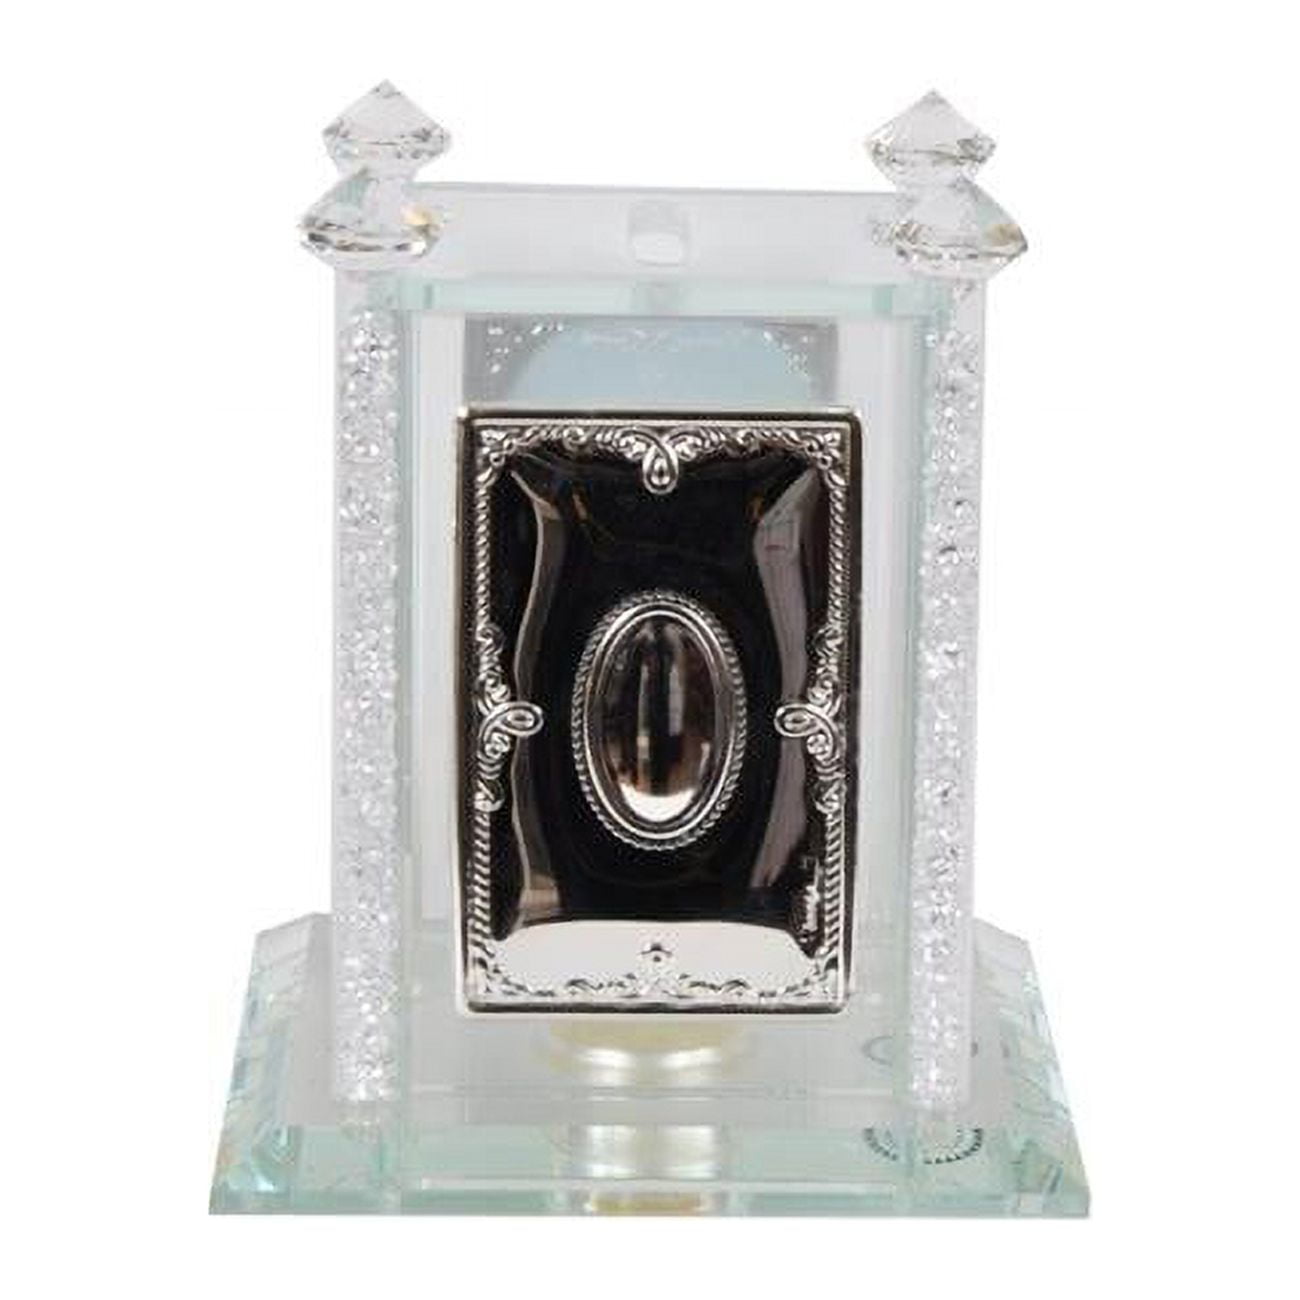 Picture of AM Judaica 5129 5 x 0.25 x 312 in. Tzedakah Box with Silver Crystal - 4 Piece